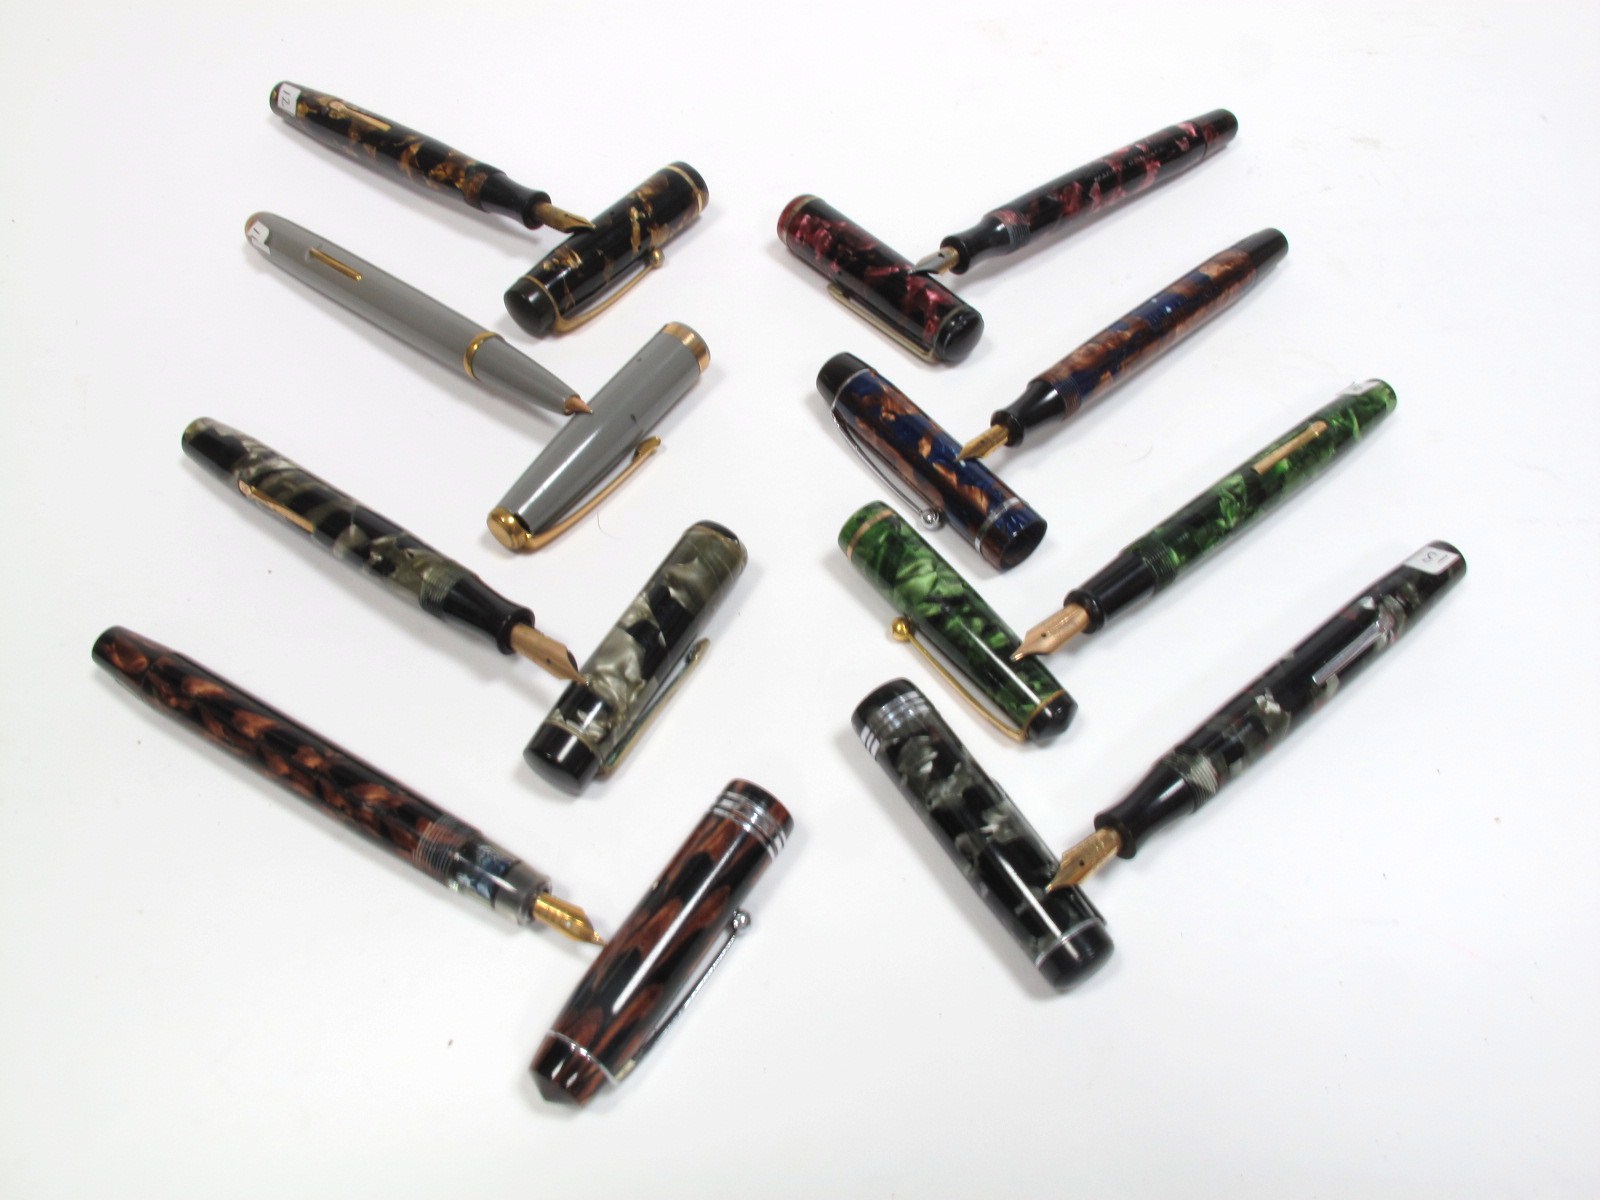 Mentmore Fountain Pens: "Dictator", "Supreme", "Diploma" (2), "Auto-Flow" and "Imperial" brown/